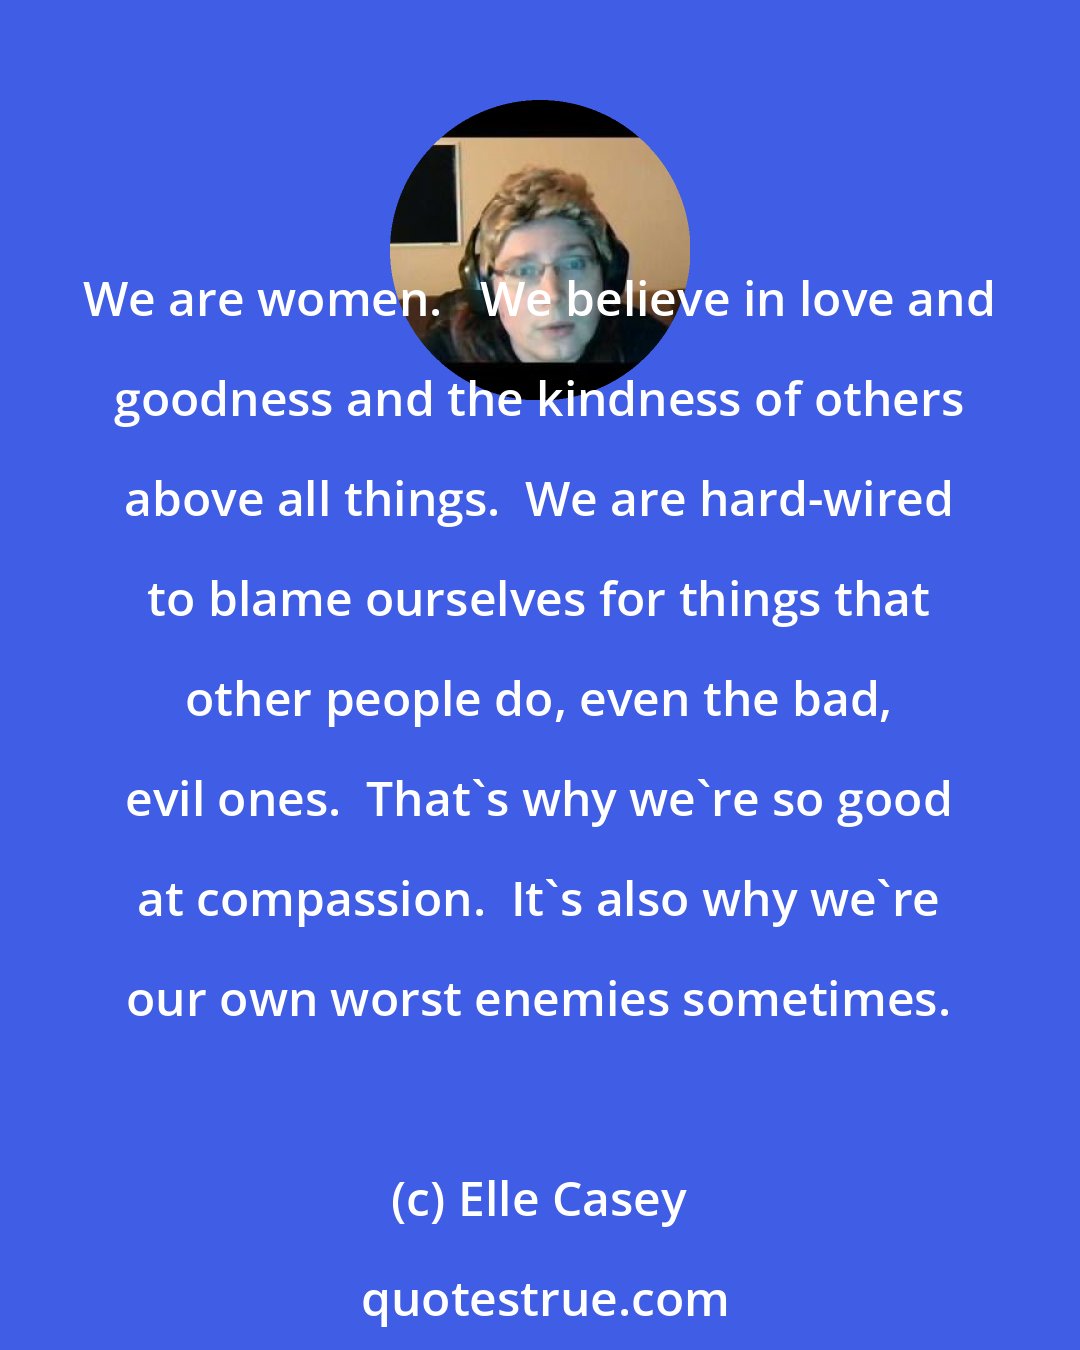 Elle Casey: We are women.   We believe in love and goodness and the kindness of others above all things.  We are hard-wired to blame ourselves for things that other people do, even the bad, evil ones.  That's why we're so good at compassion.  It's also why we're our own worst enemies sometimes.